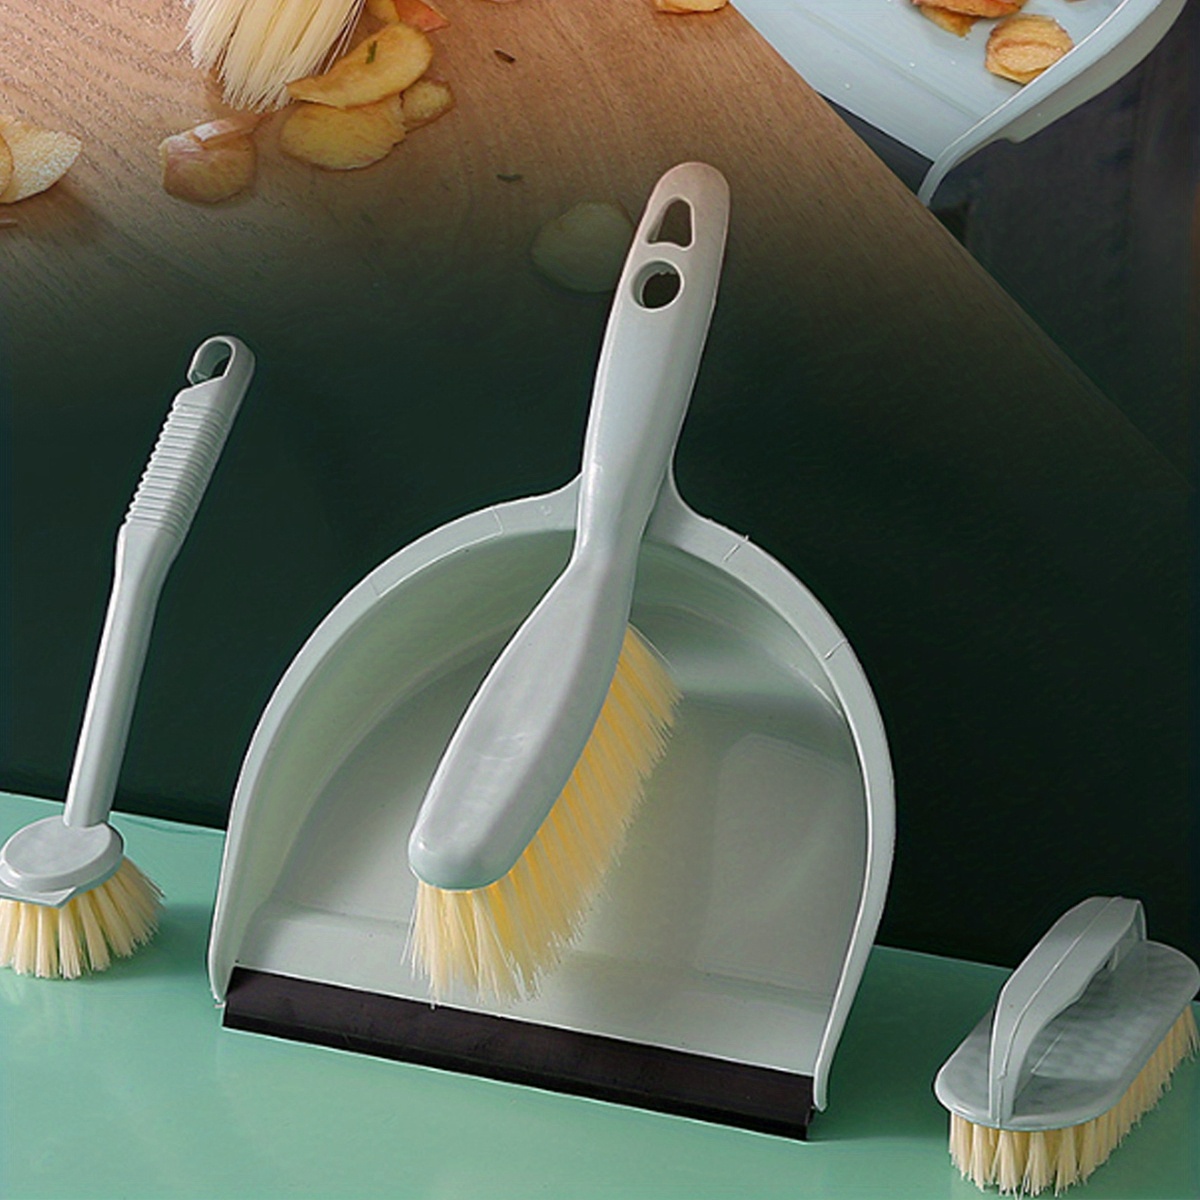 Small Broom and Dustpan Set,Mini Handheld Dust pan with Cleaning